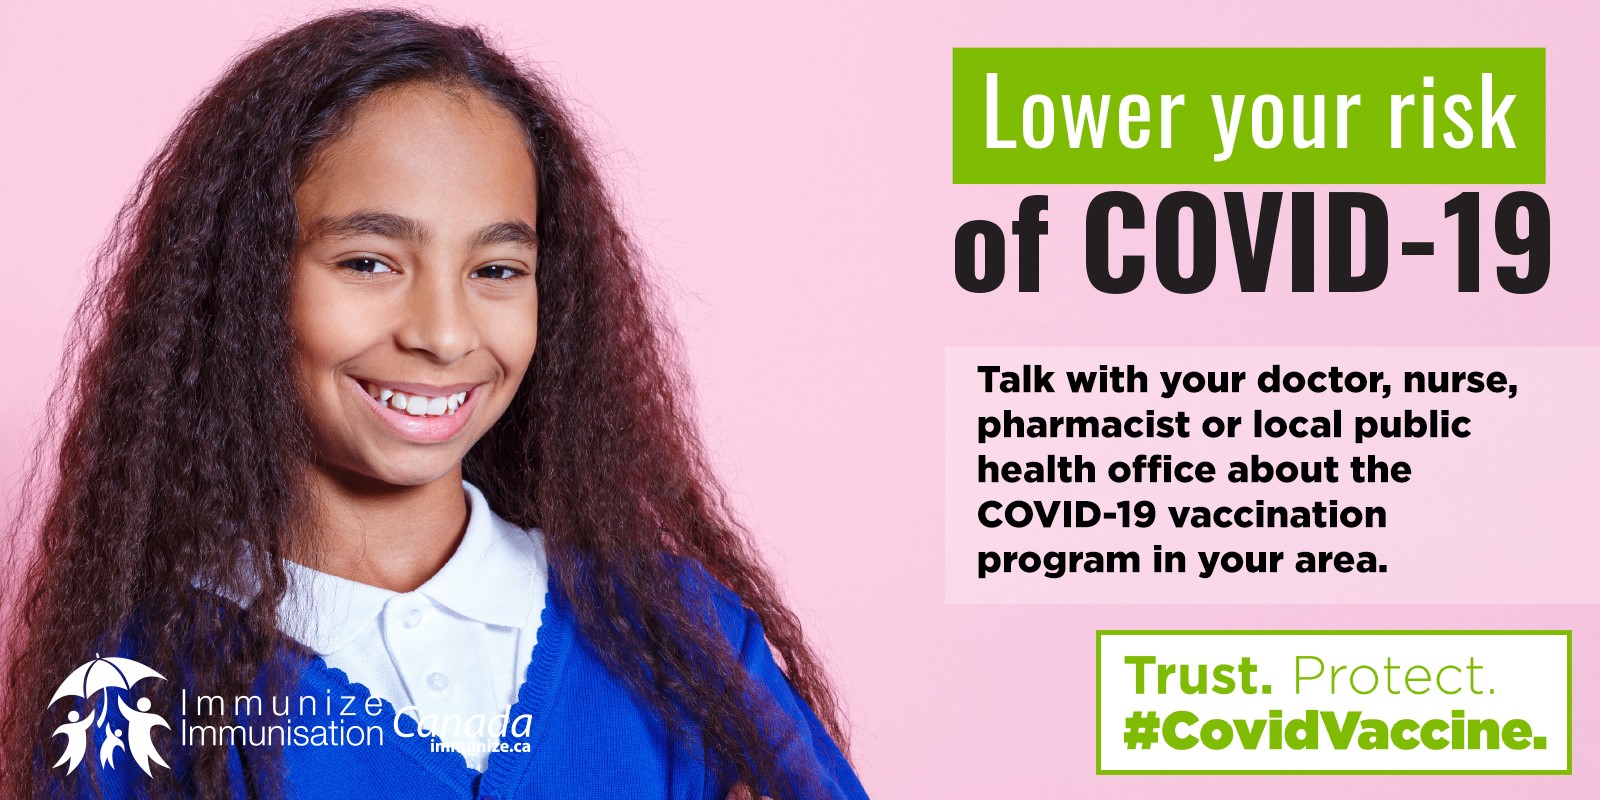 Lower your risk of COVID-19: teens